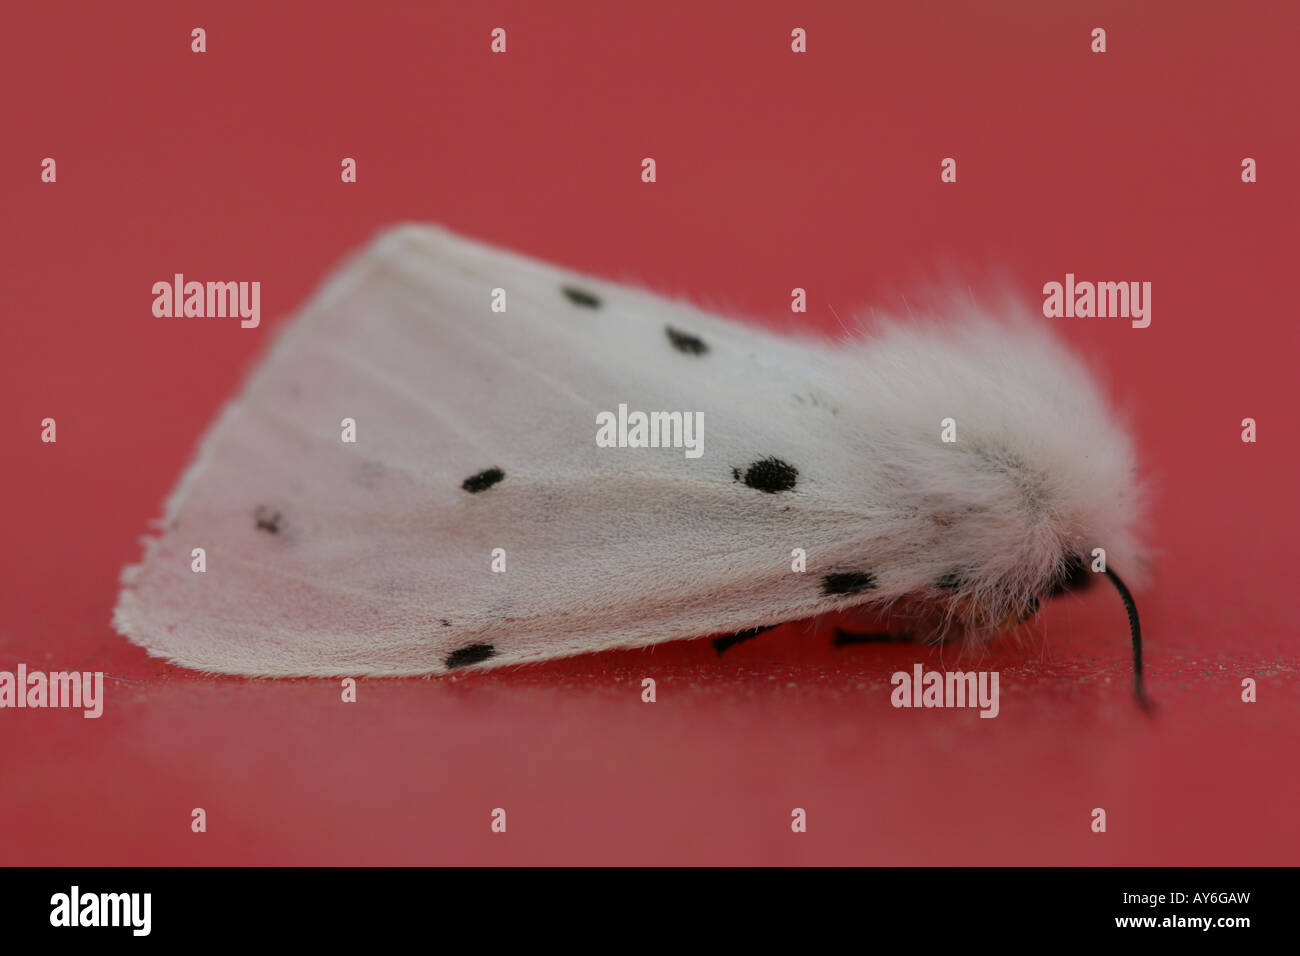 White moth with black spots resting on red background (side view) Stock Photo